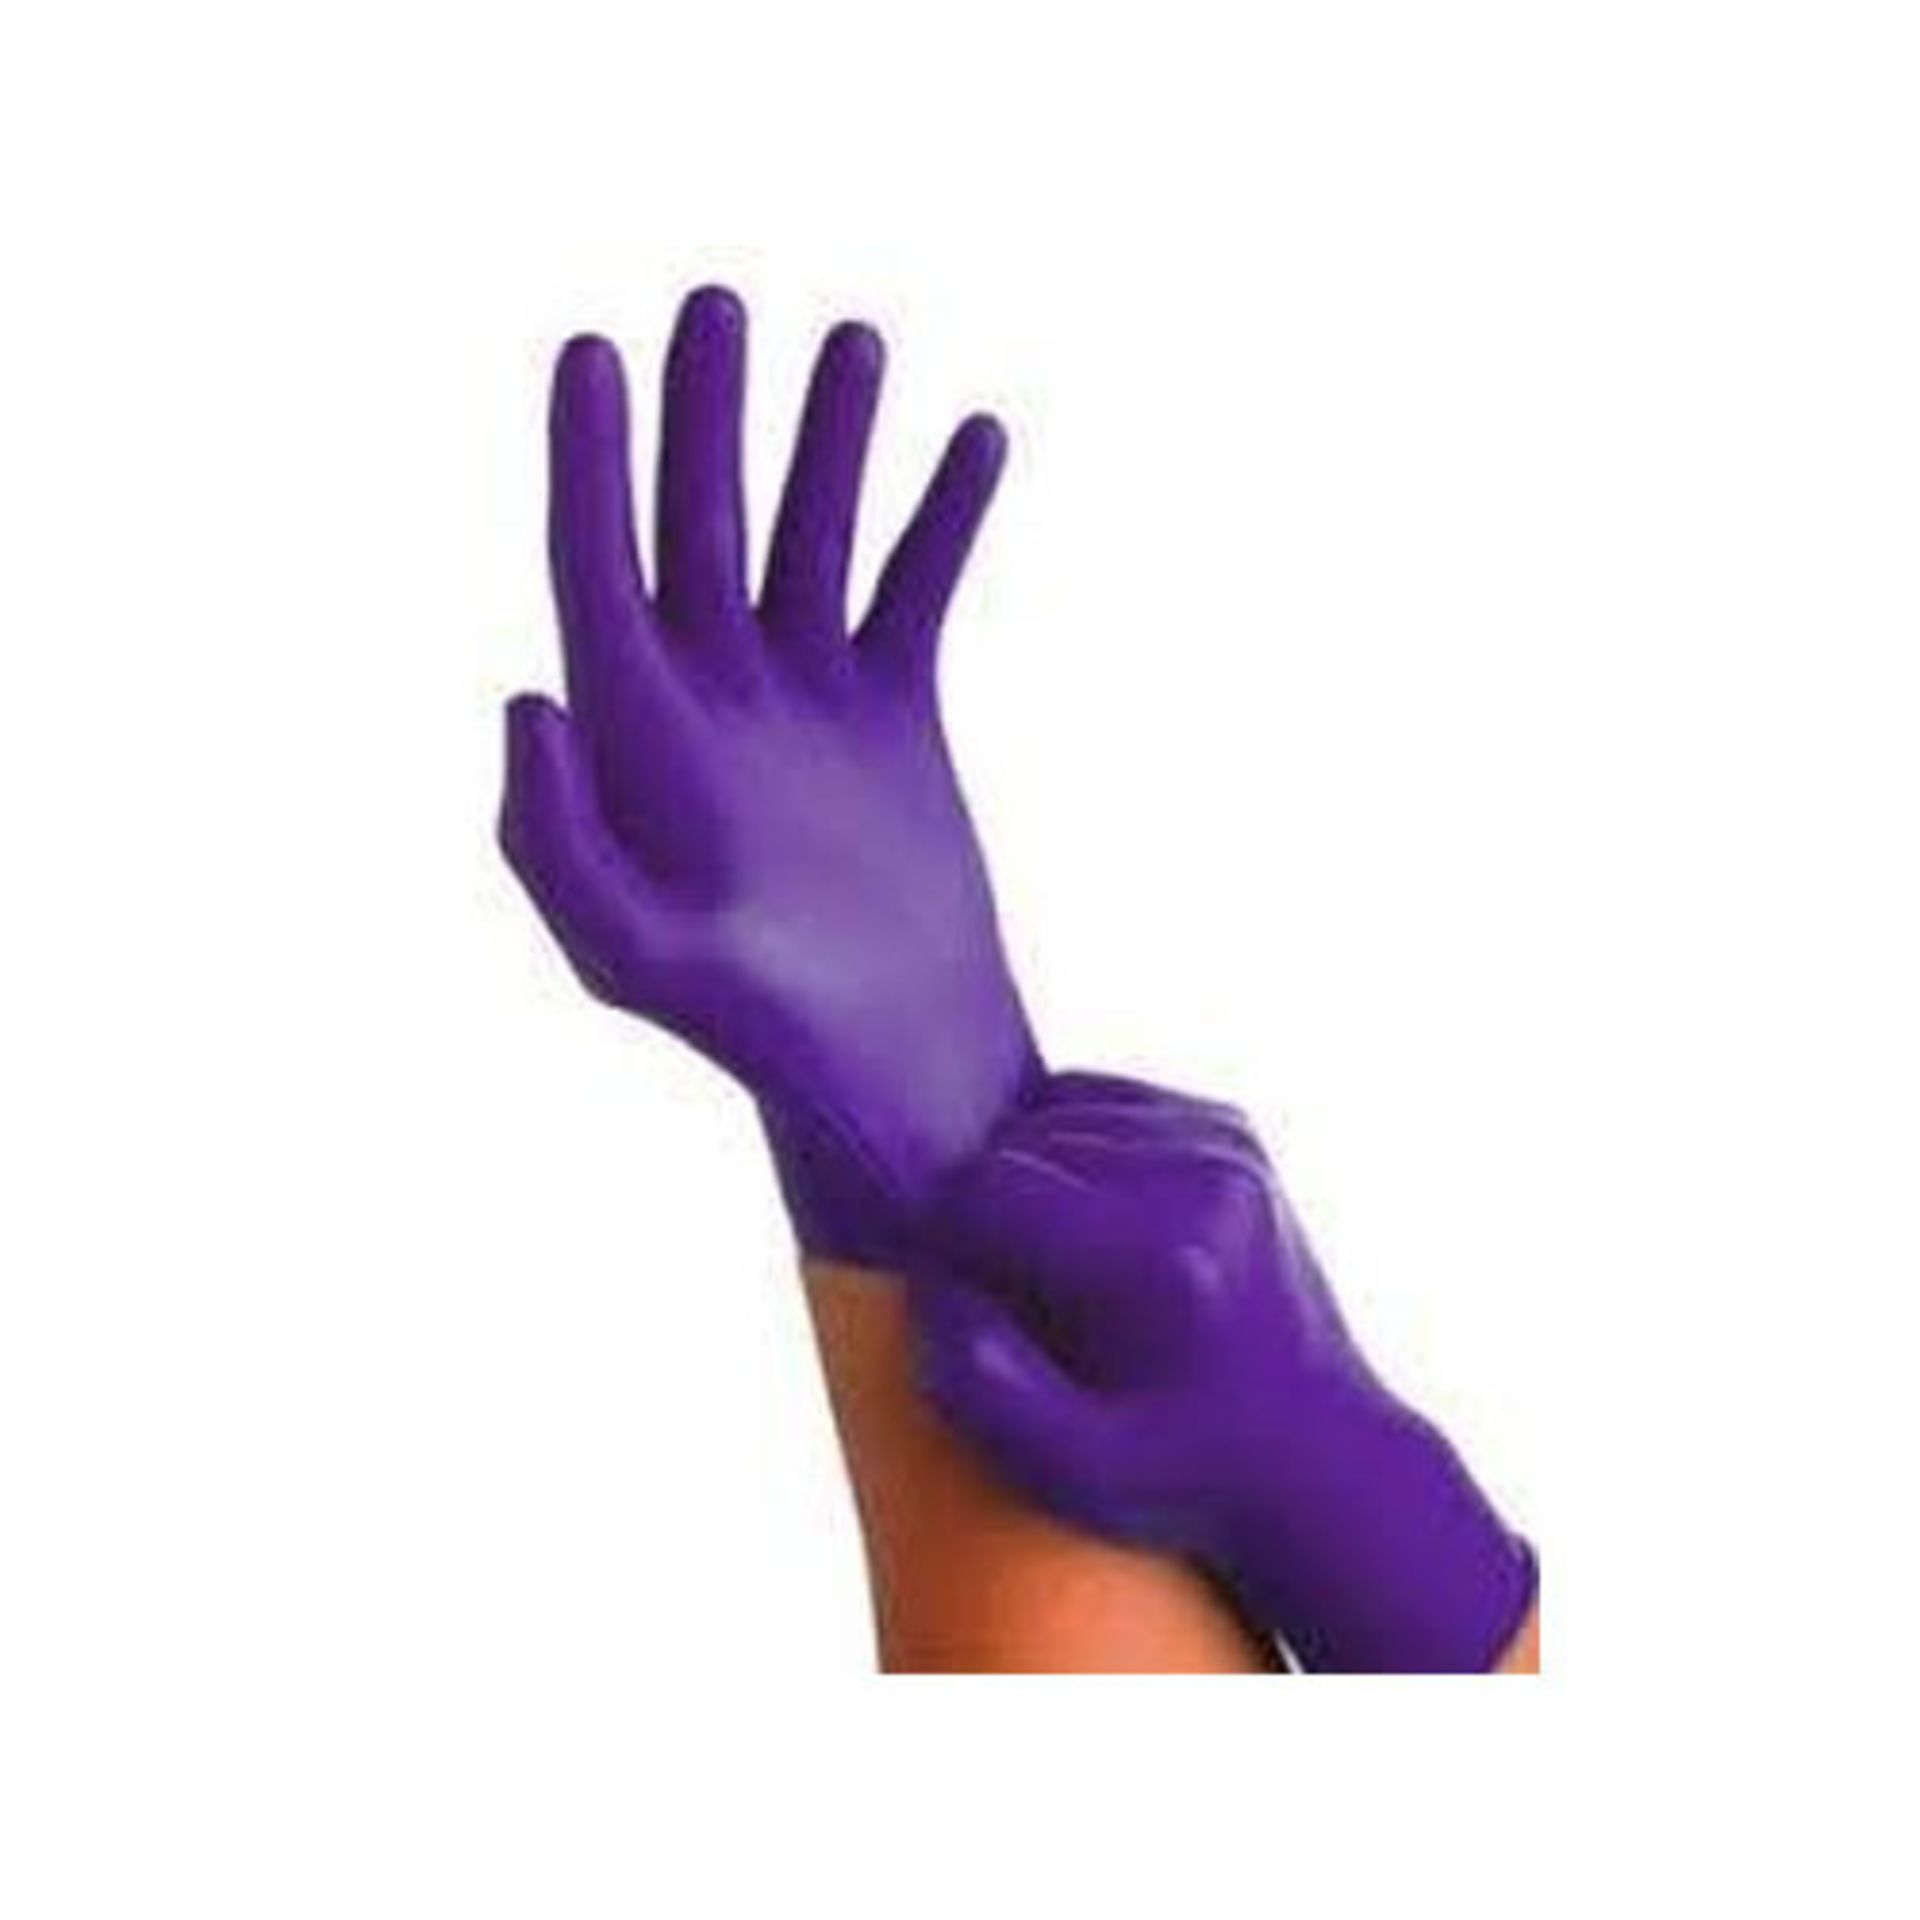 100 BOXES OF NITRILE GLOVES POWDER LATEX FREE PURPLE 100 PER BOX RRP £1100 - Image 4 of 4